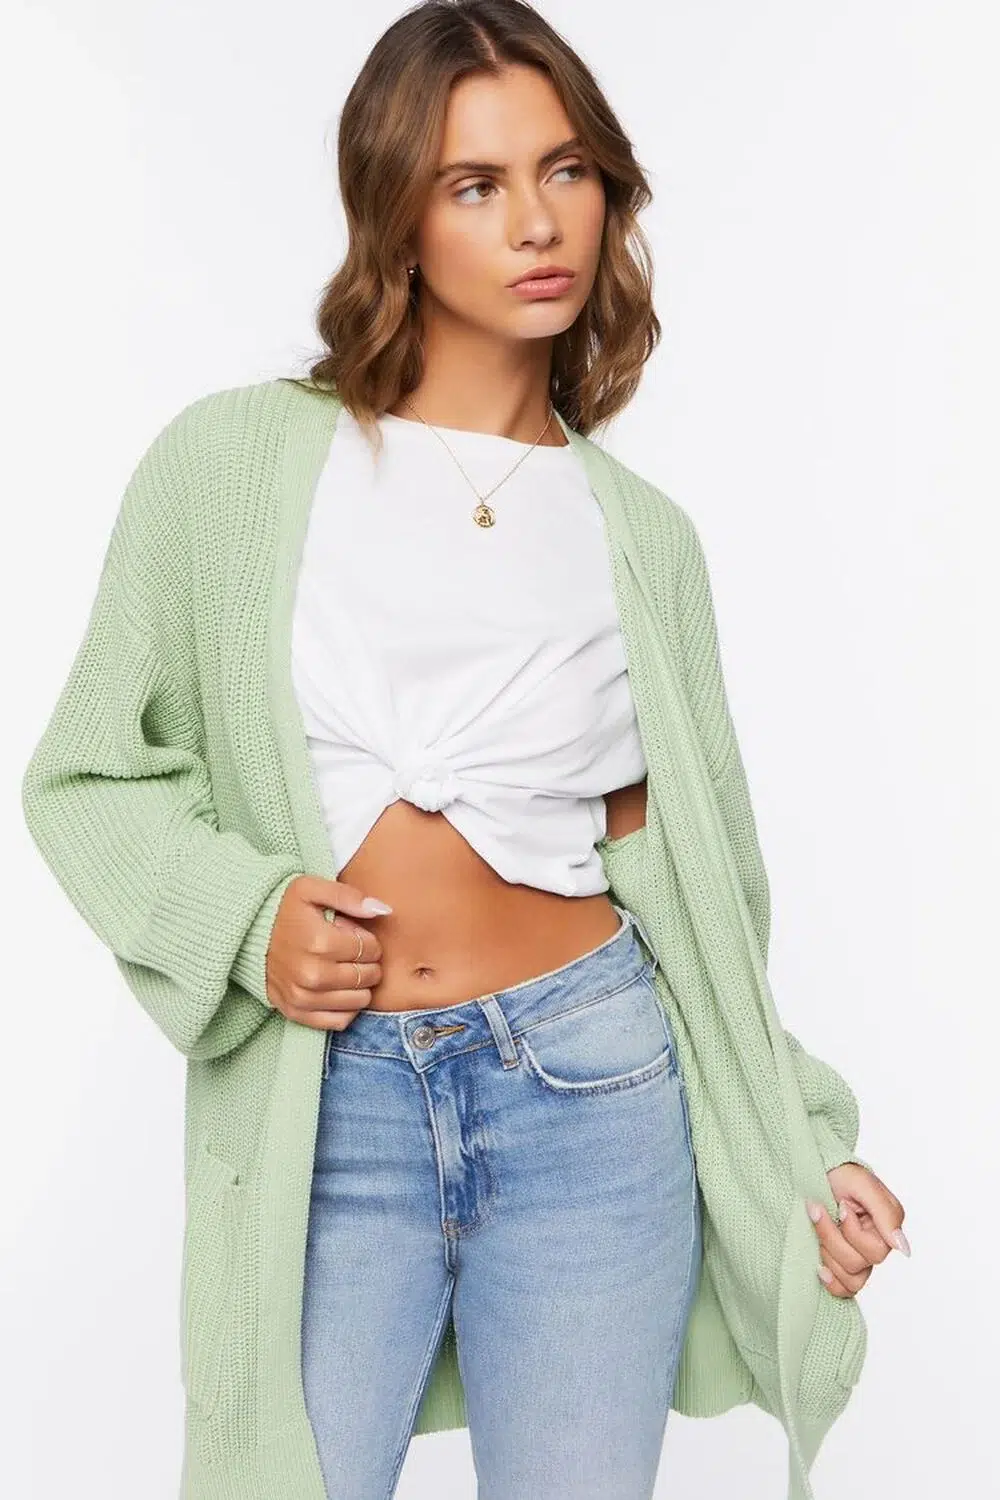 10. Forever 21 Open-Front Cardigan Sweater